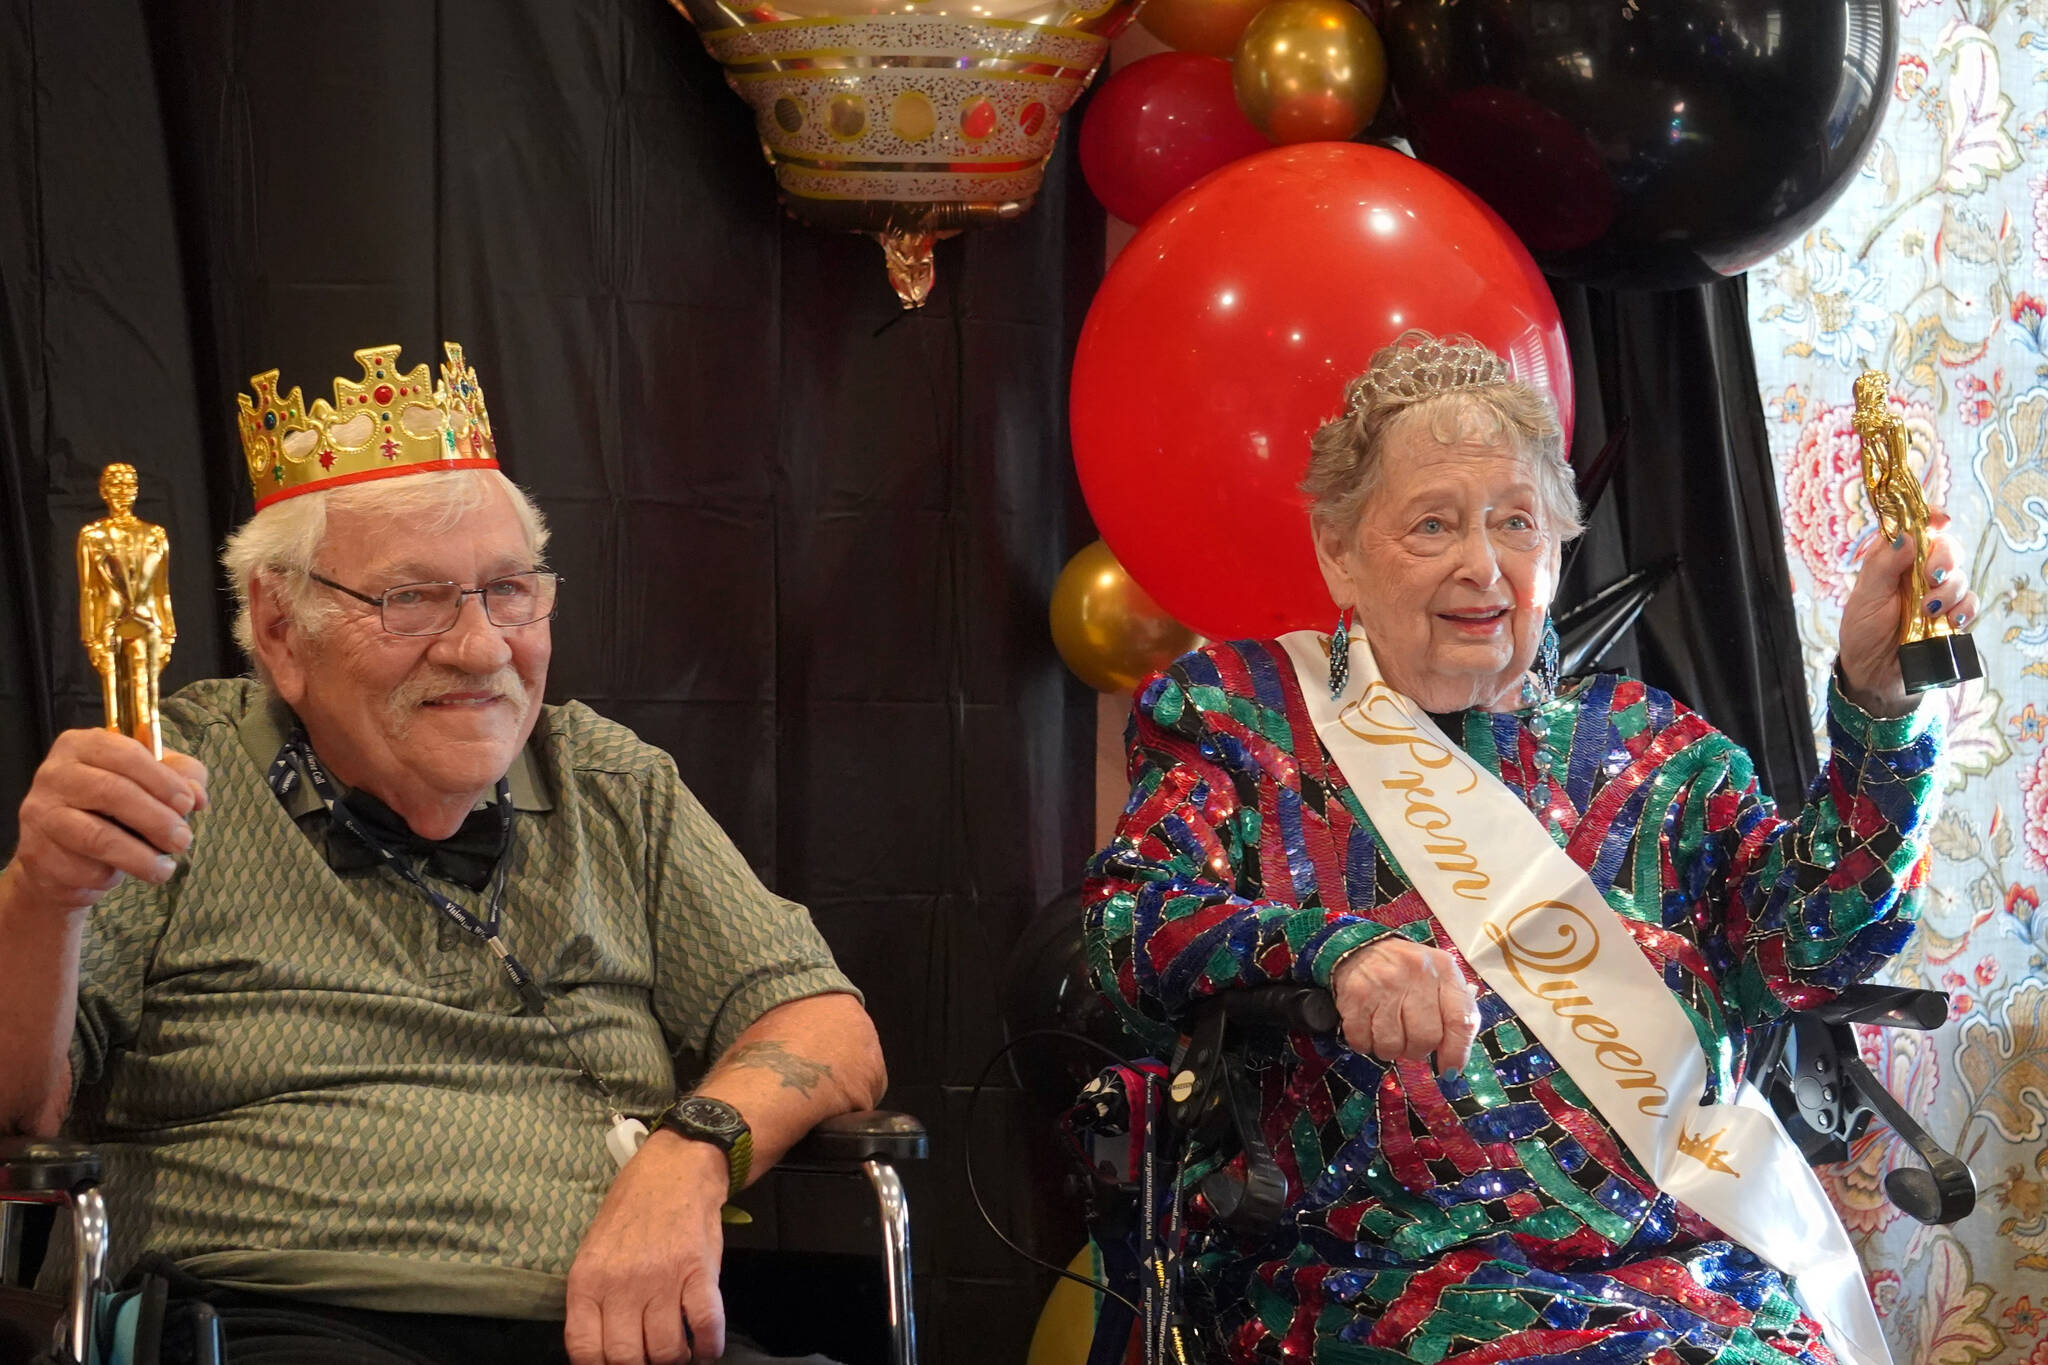 Senior Prom King and Queen Dennis Borbon and Lorraine Ashcraft are crowned at the 2023 High Roller Senior Prom at Aspen Creek Senior Living in Kenai, Alaska, on Friday, Sept. 22, 2023. (Jake Dye/Peninsula Clarion)